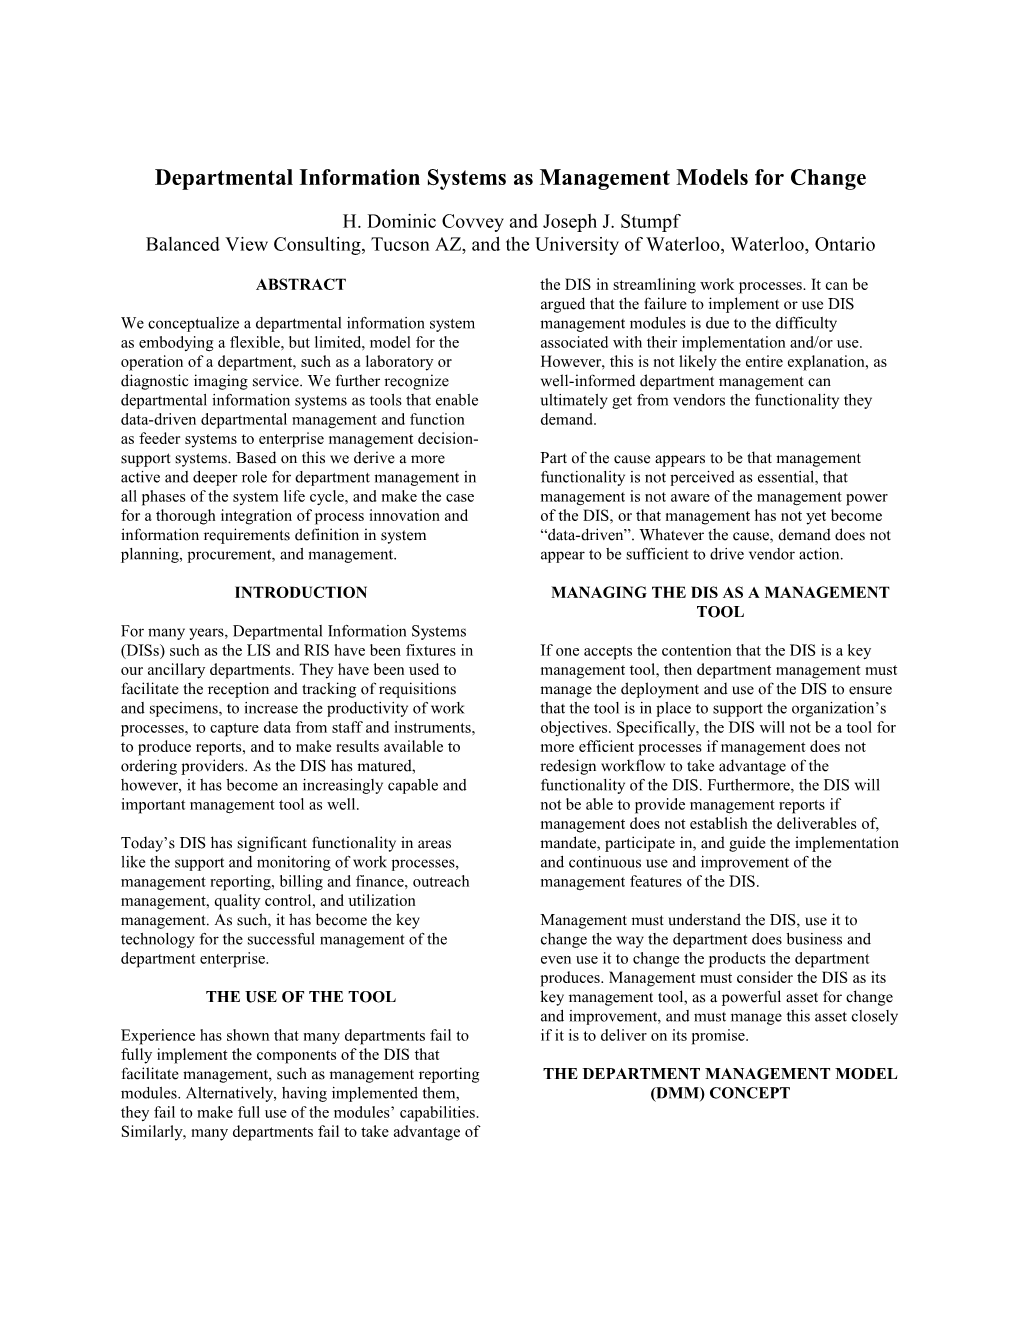 Departmental Information Systems As Management Models for Change